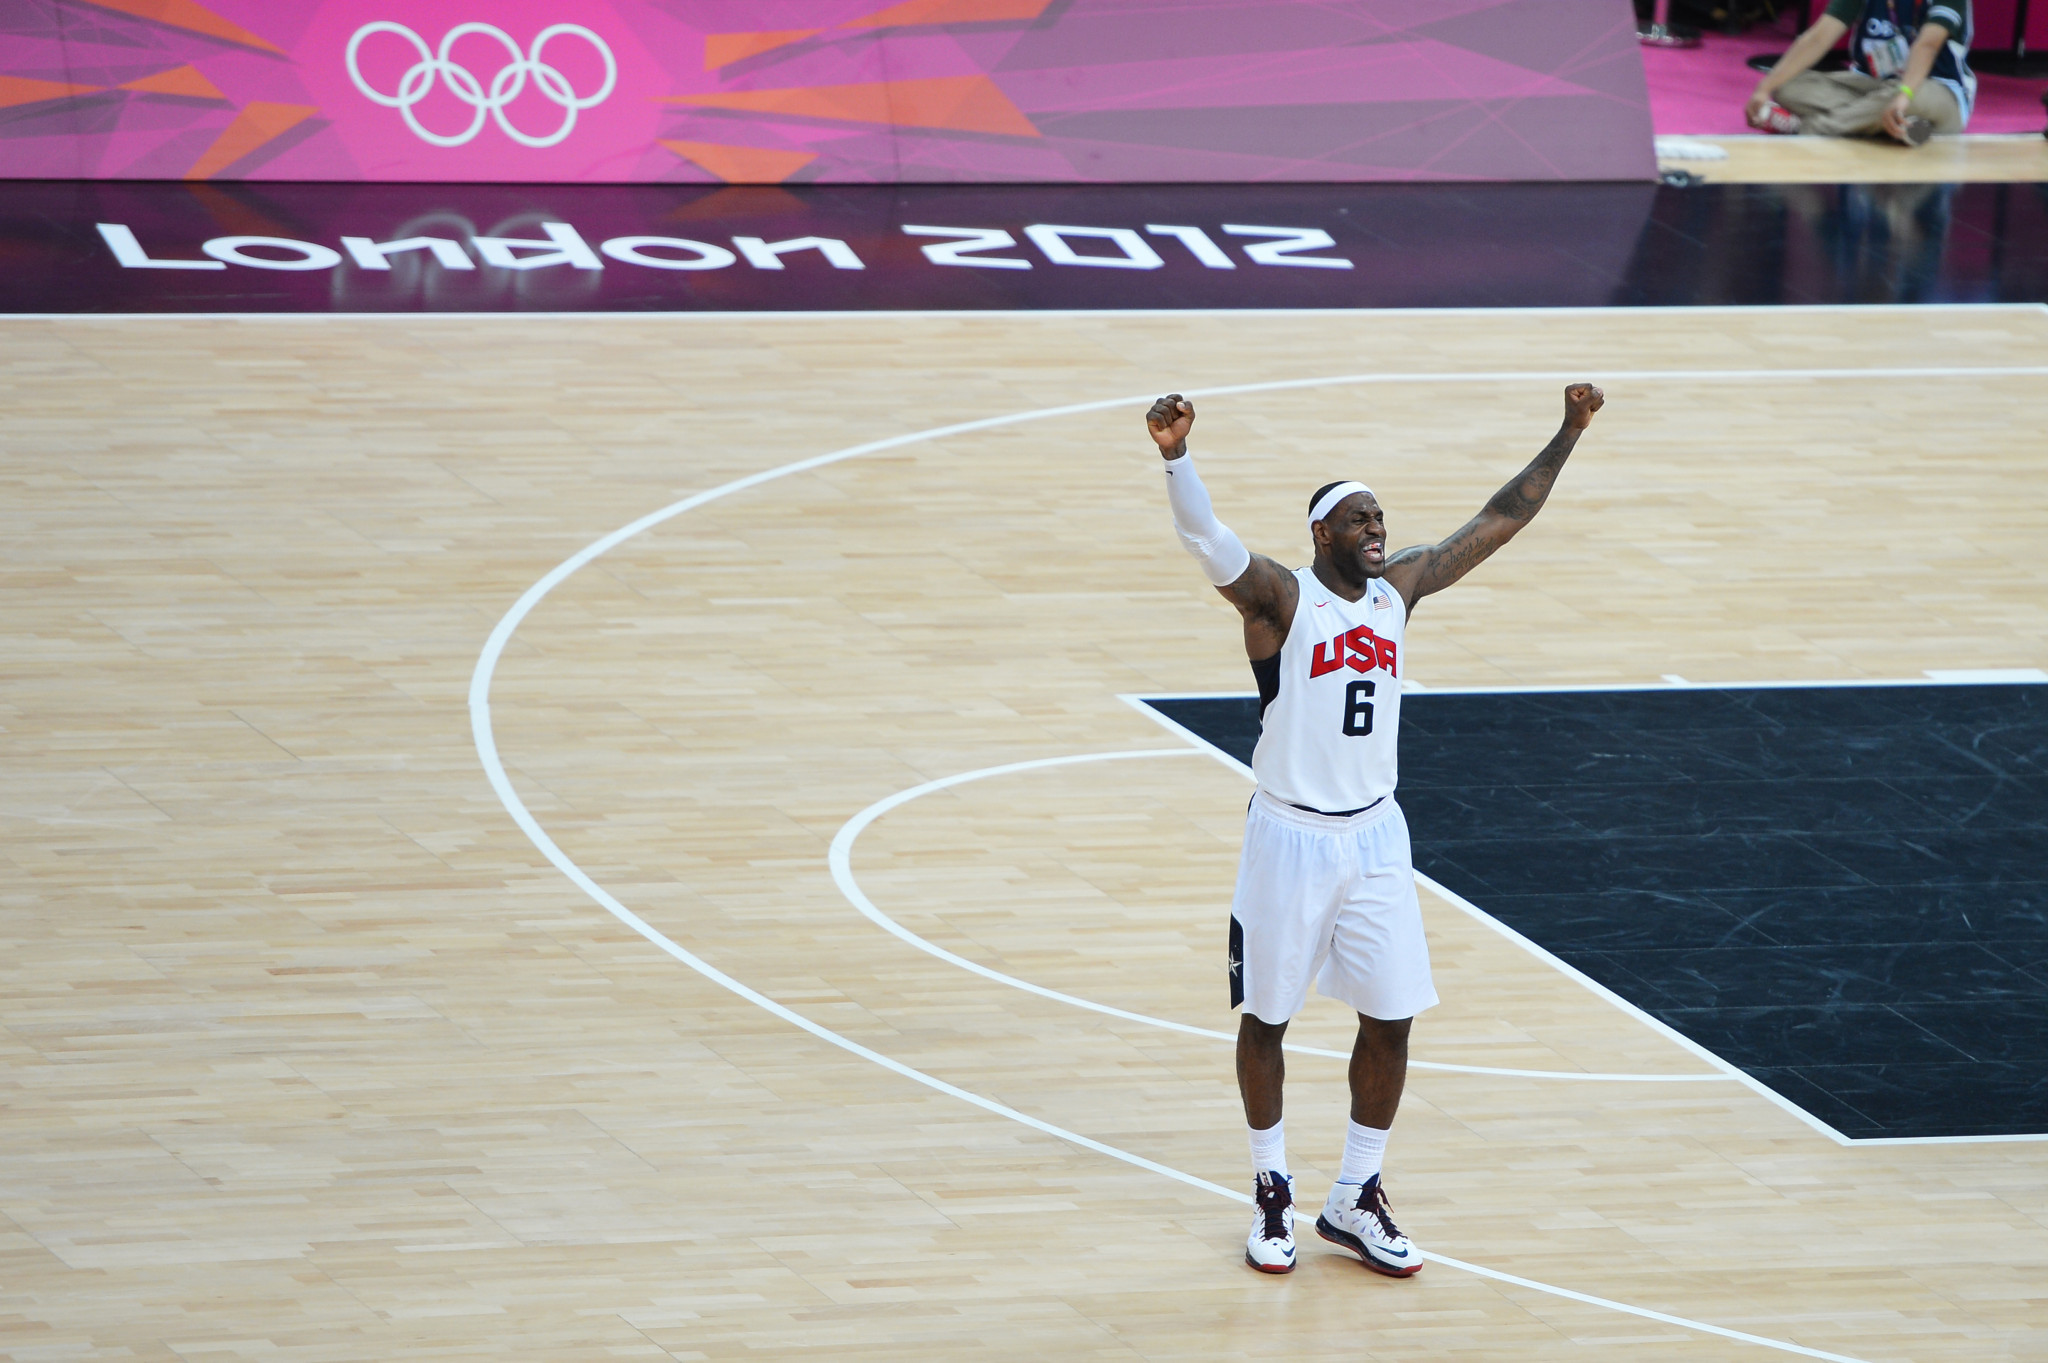 LeBron James won men's Olympic basketball gold with the United States at Beijing 2008 and London 2012, but did not feature at Rio 2016 or Tokyo 2020 ©Getty Images